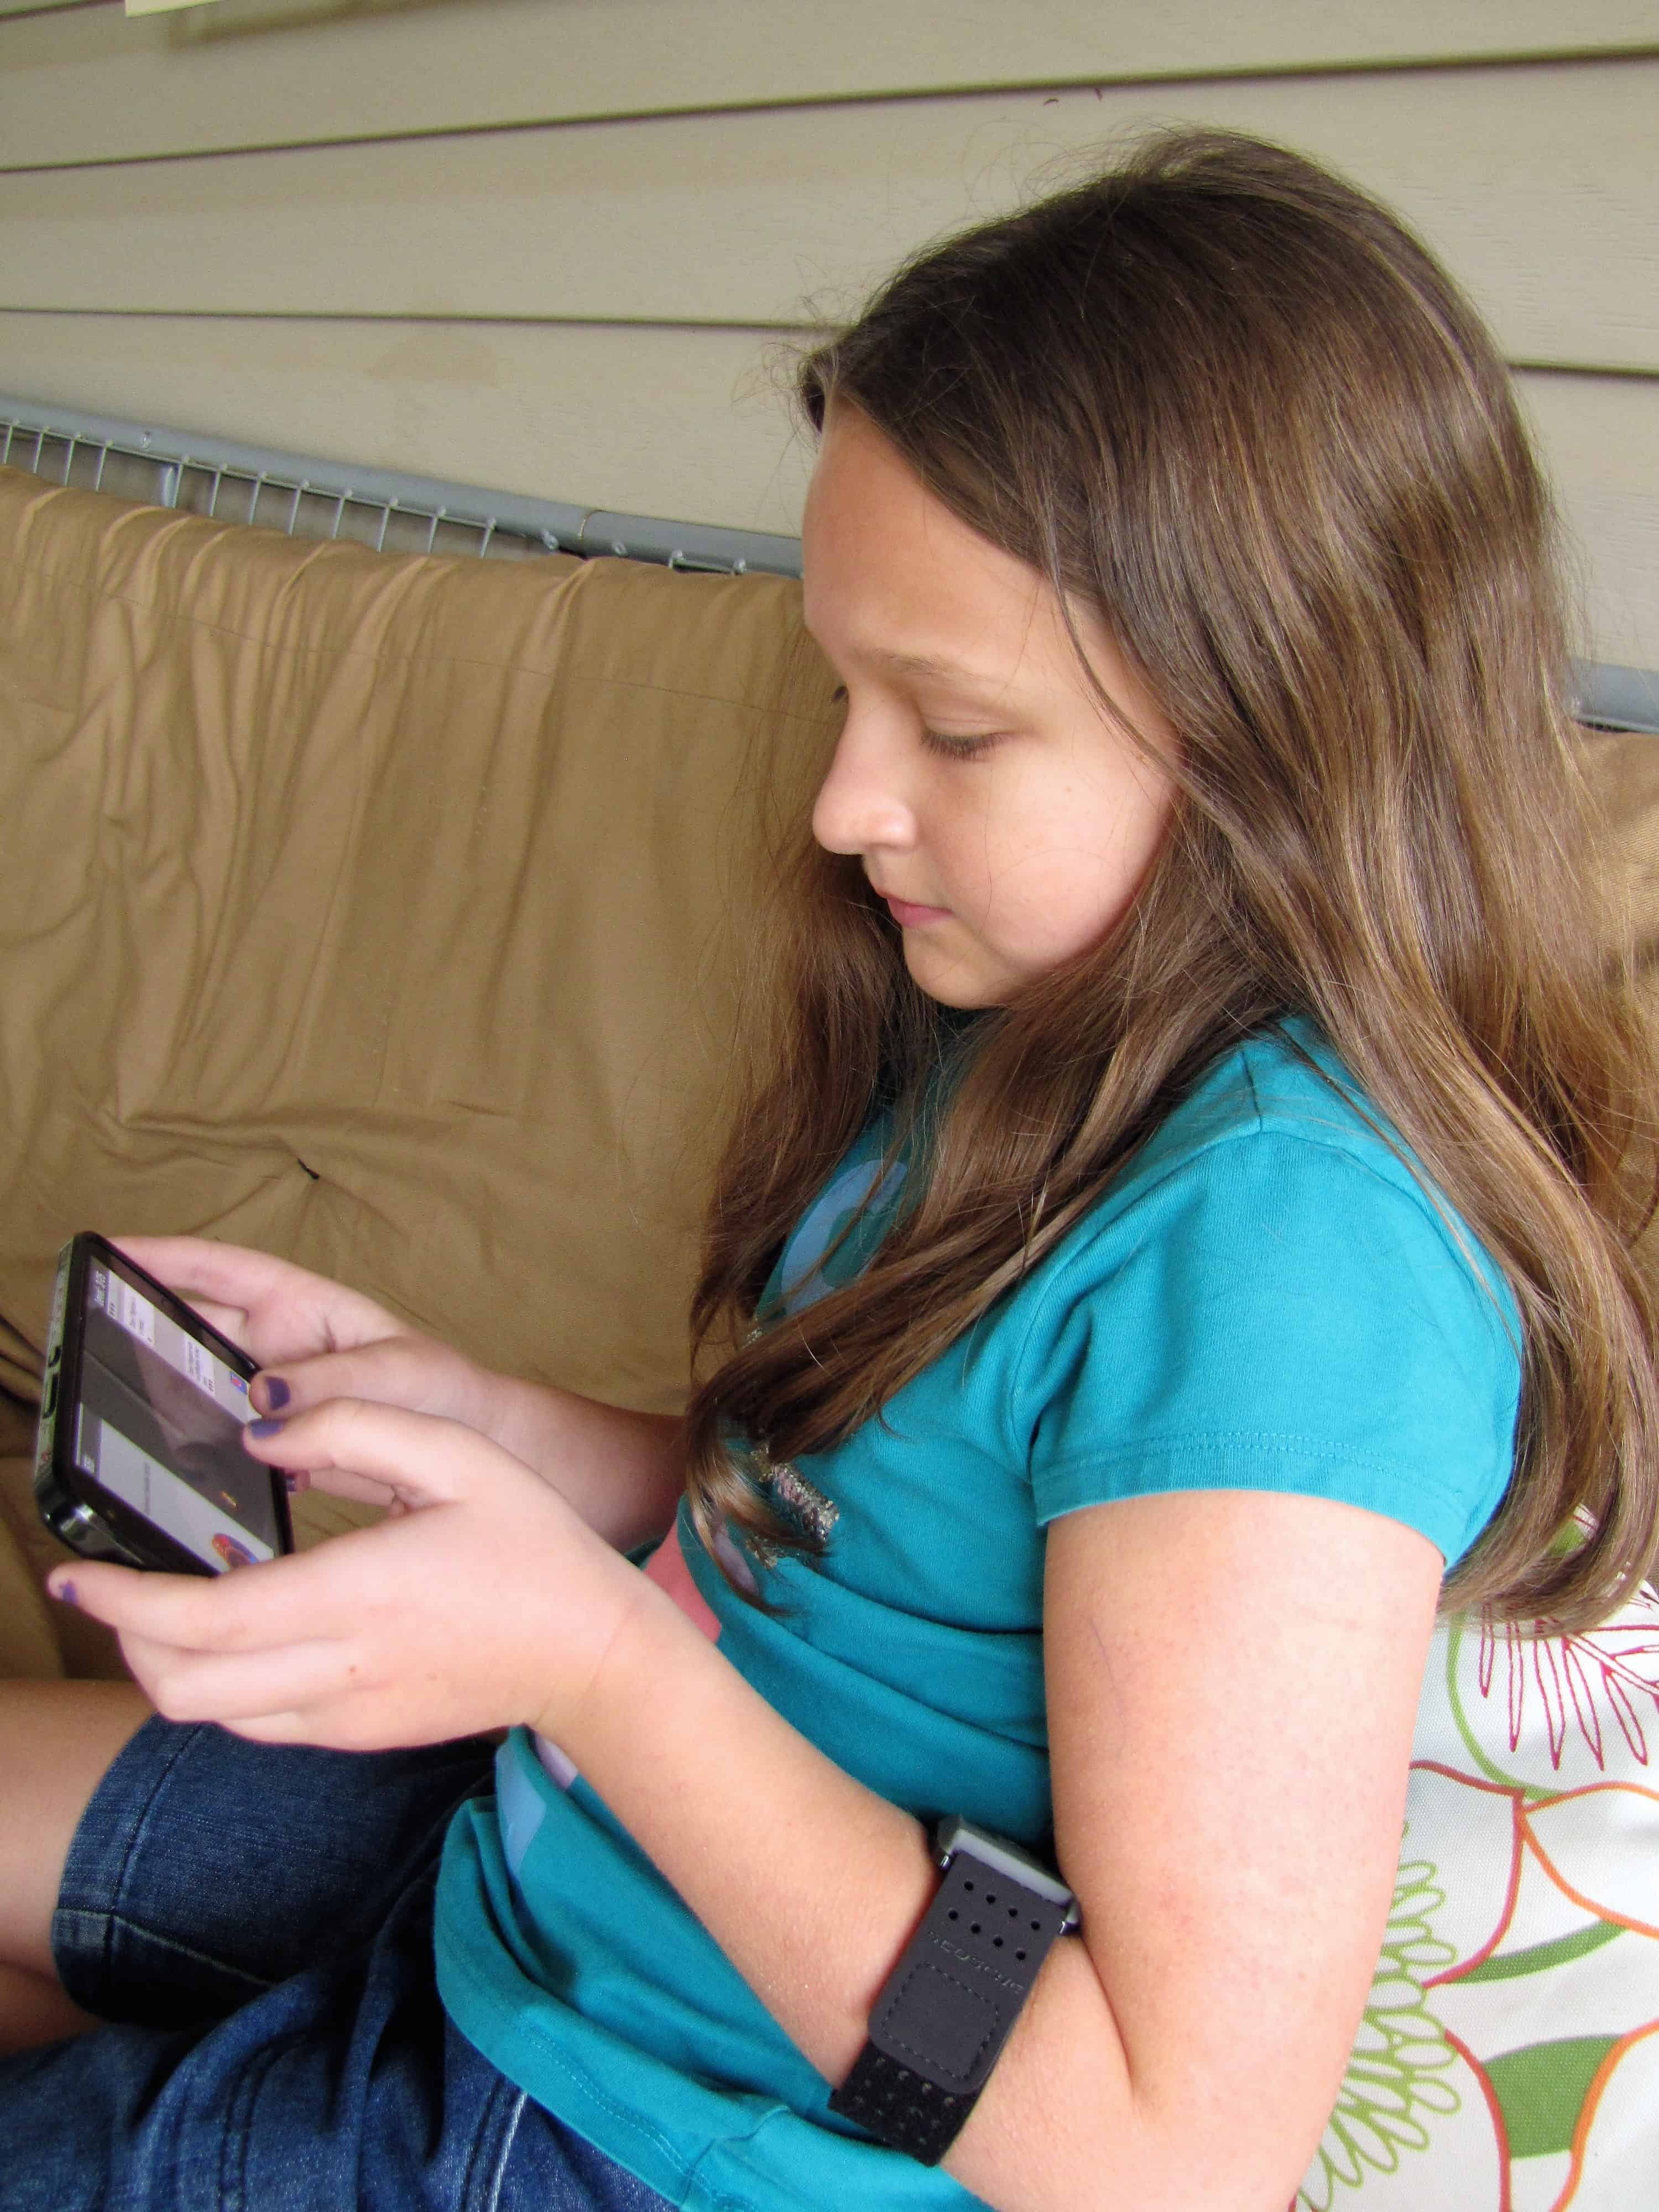 child playing a biofeedback game for emotional self-regulation